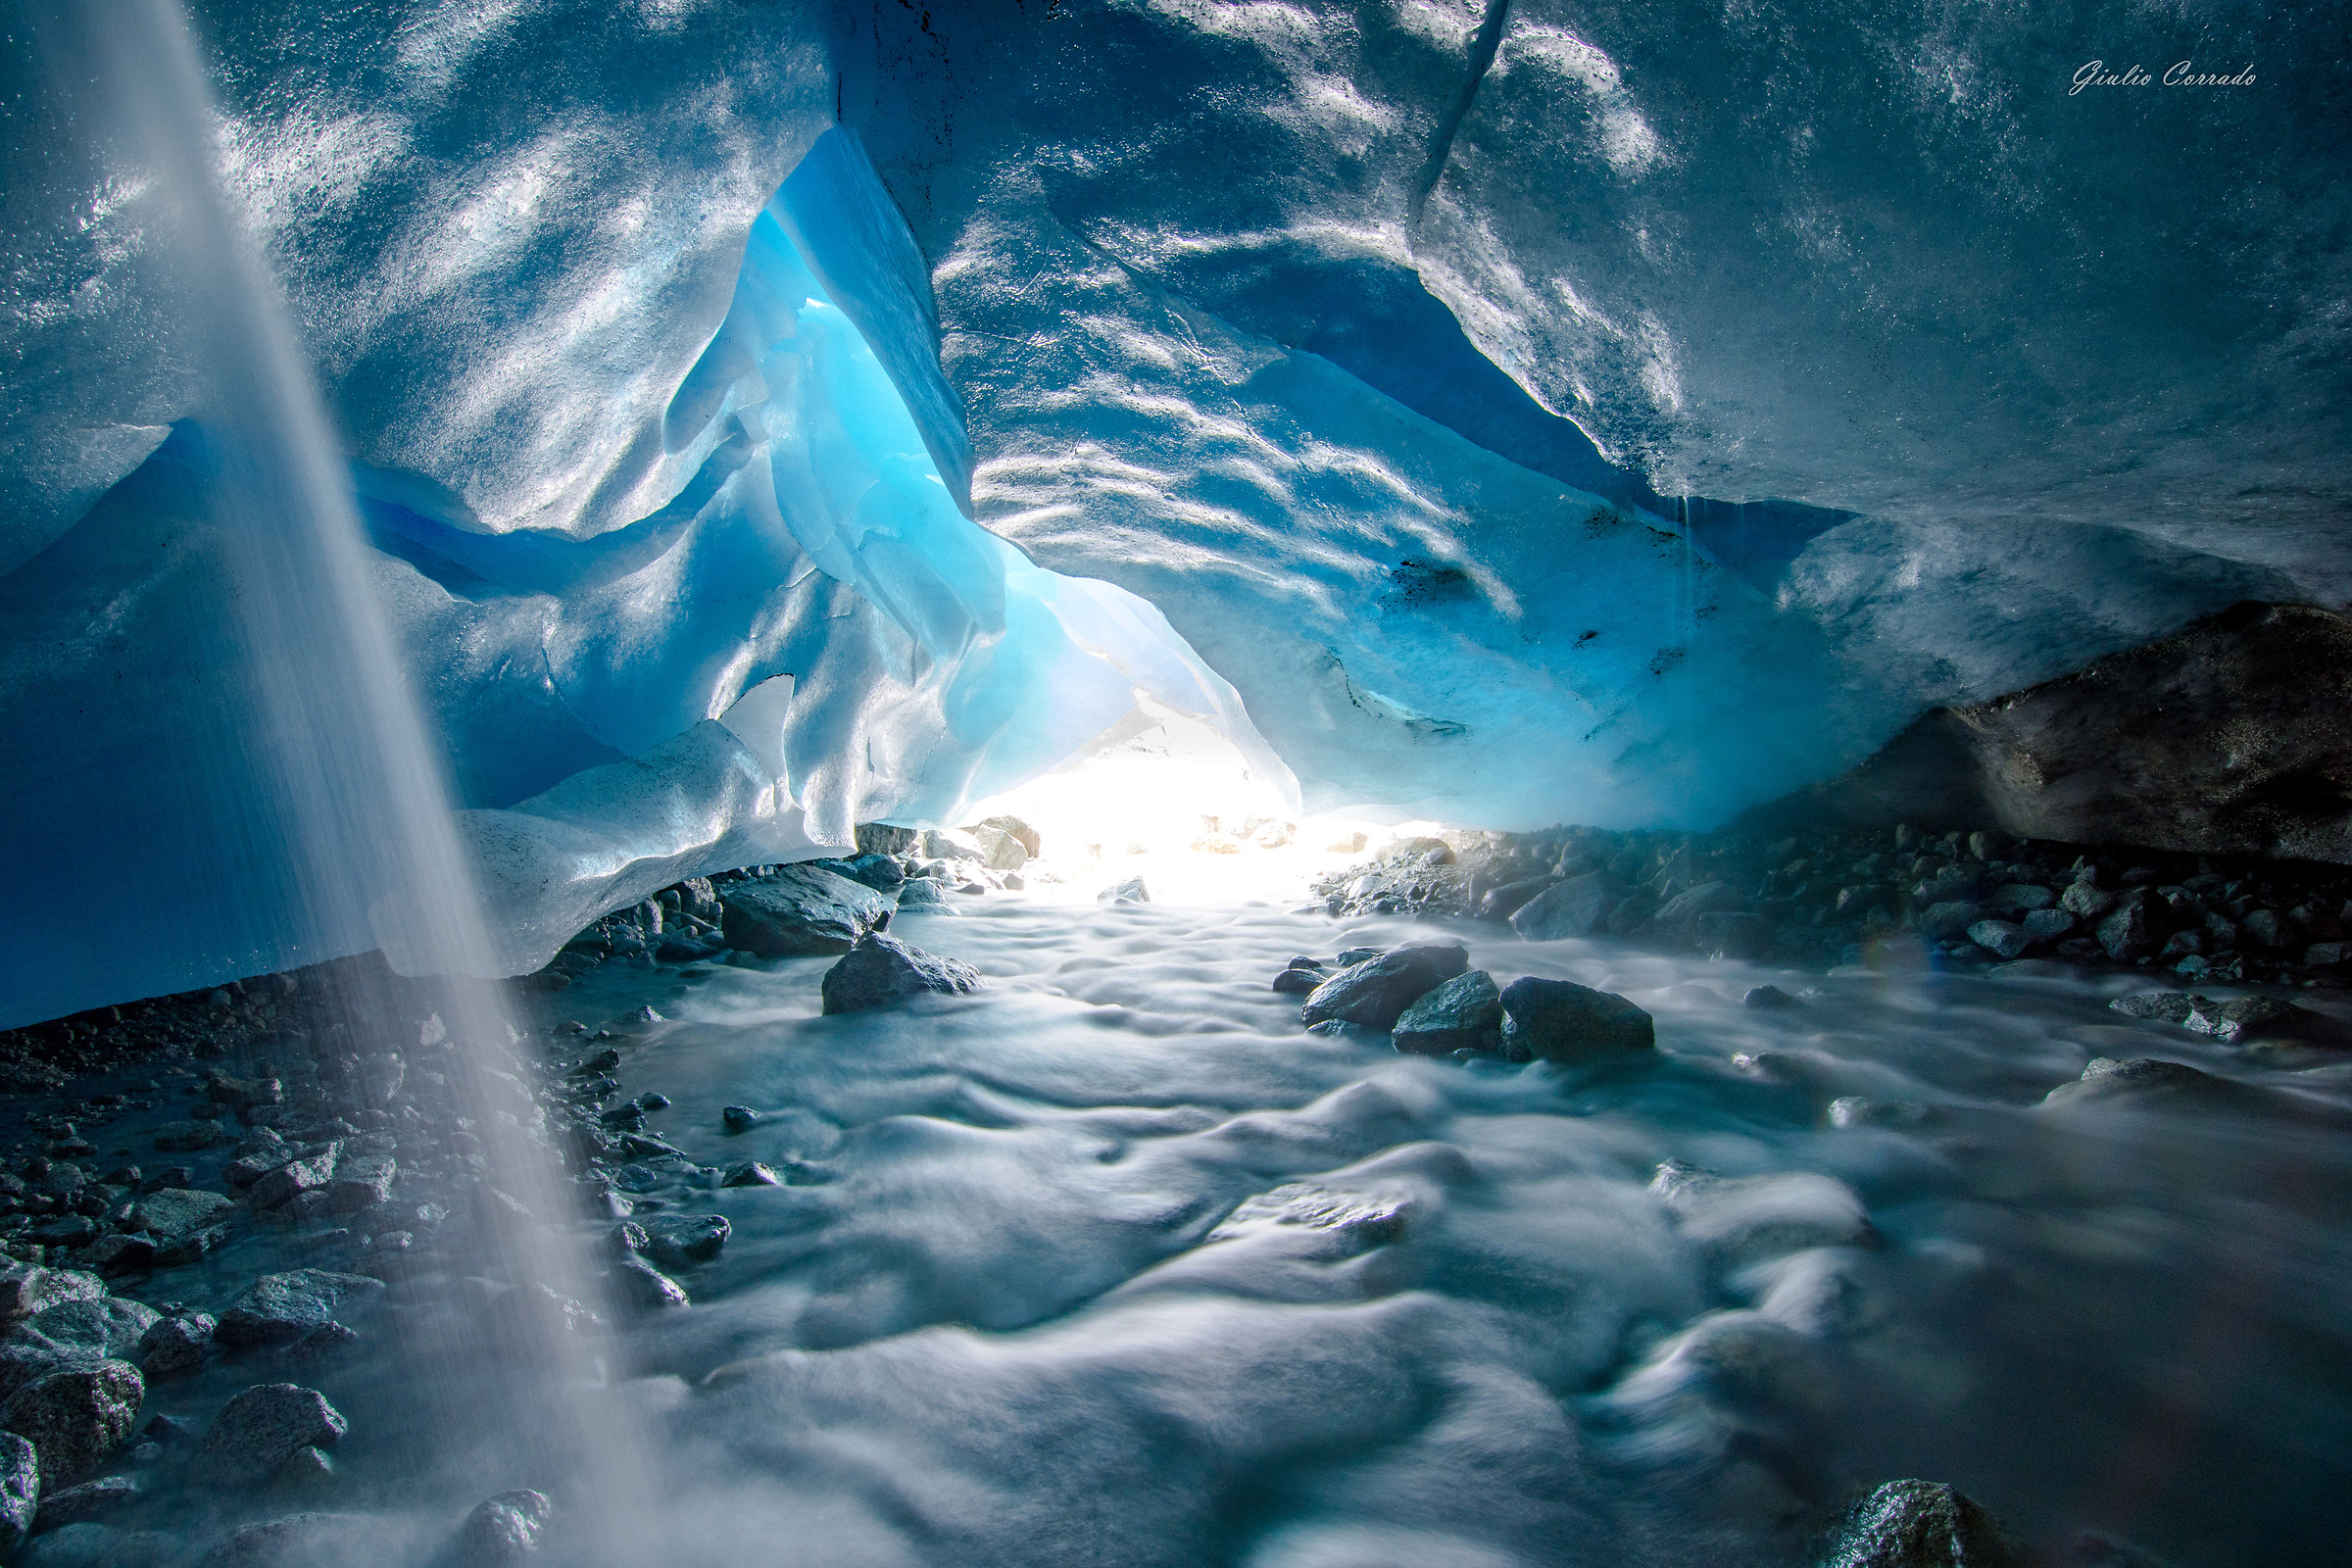 In the belly of the glacier ......